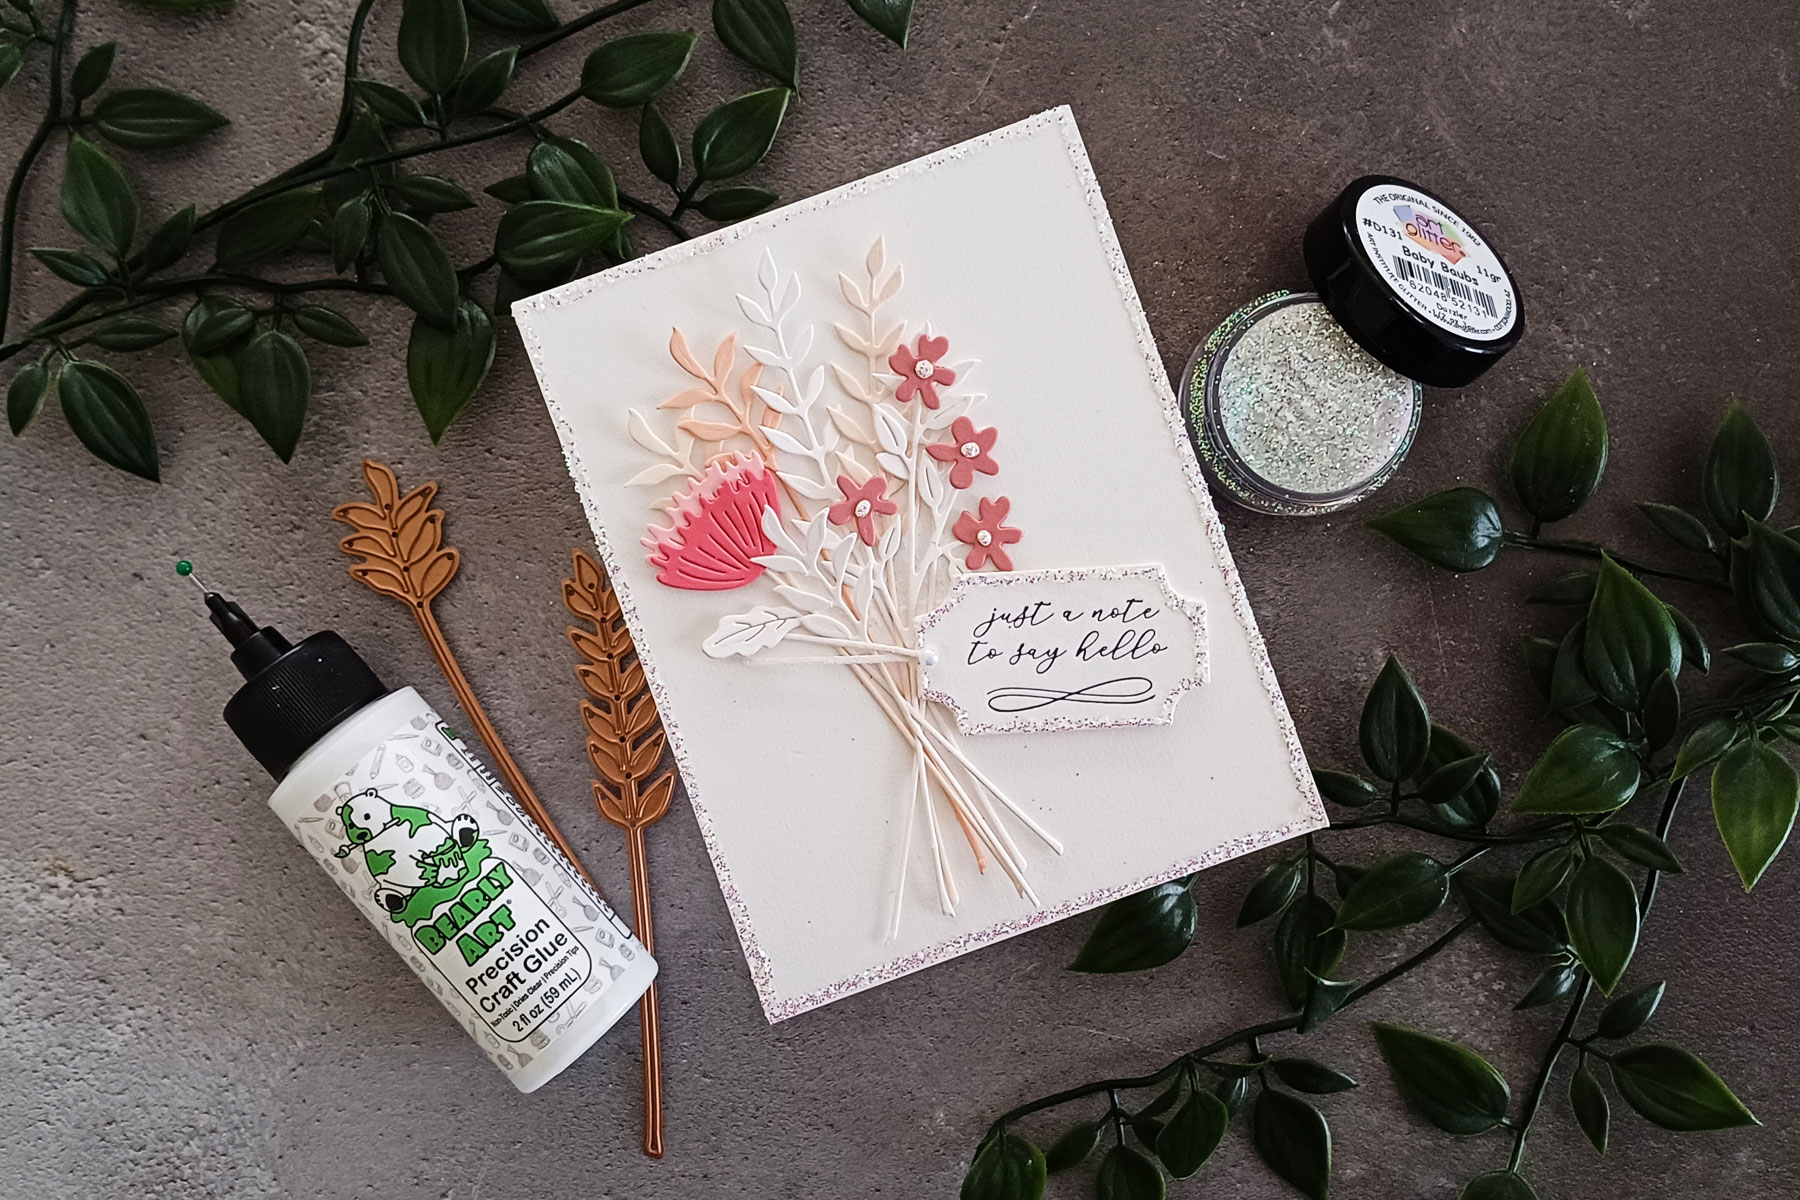 3 Techniques To Try With Art Glitter - Spellbinders Blog